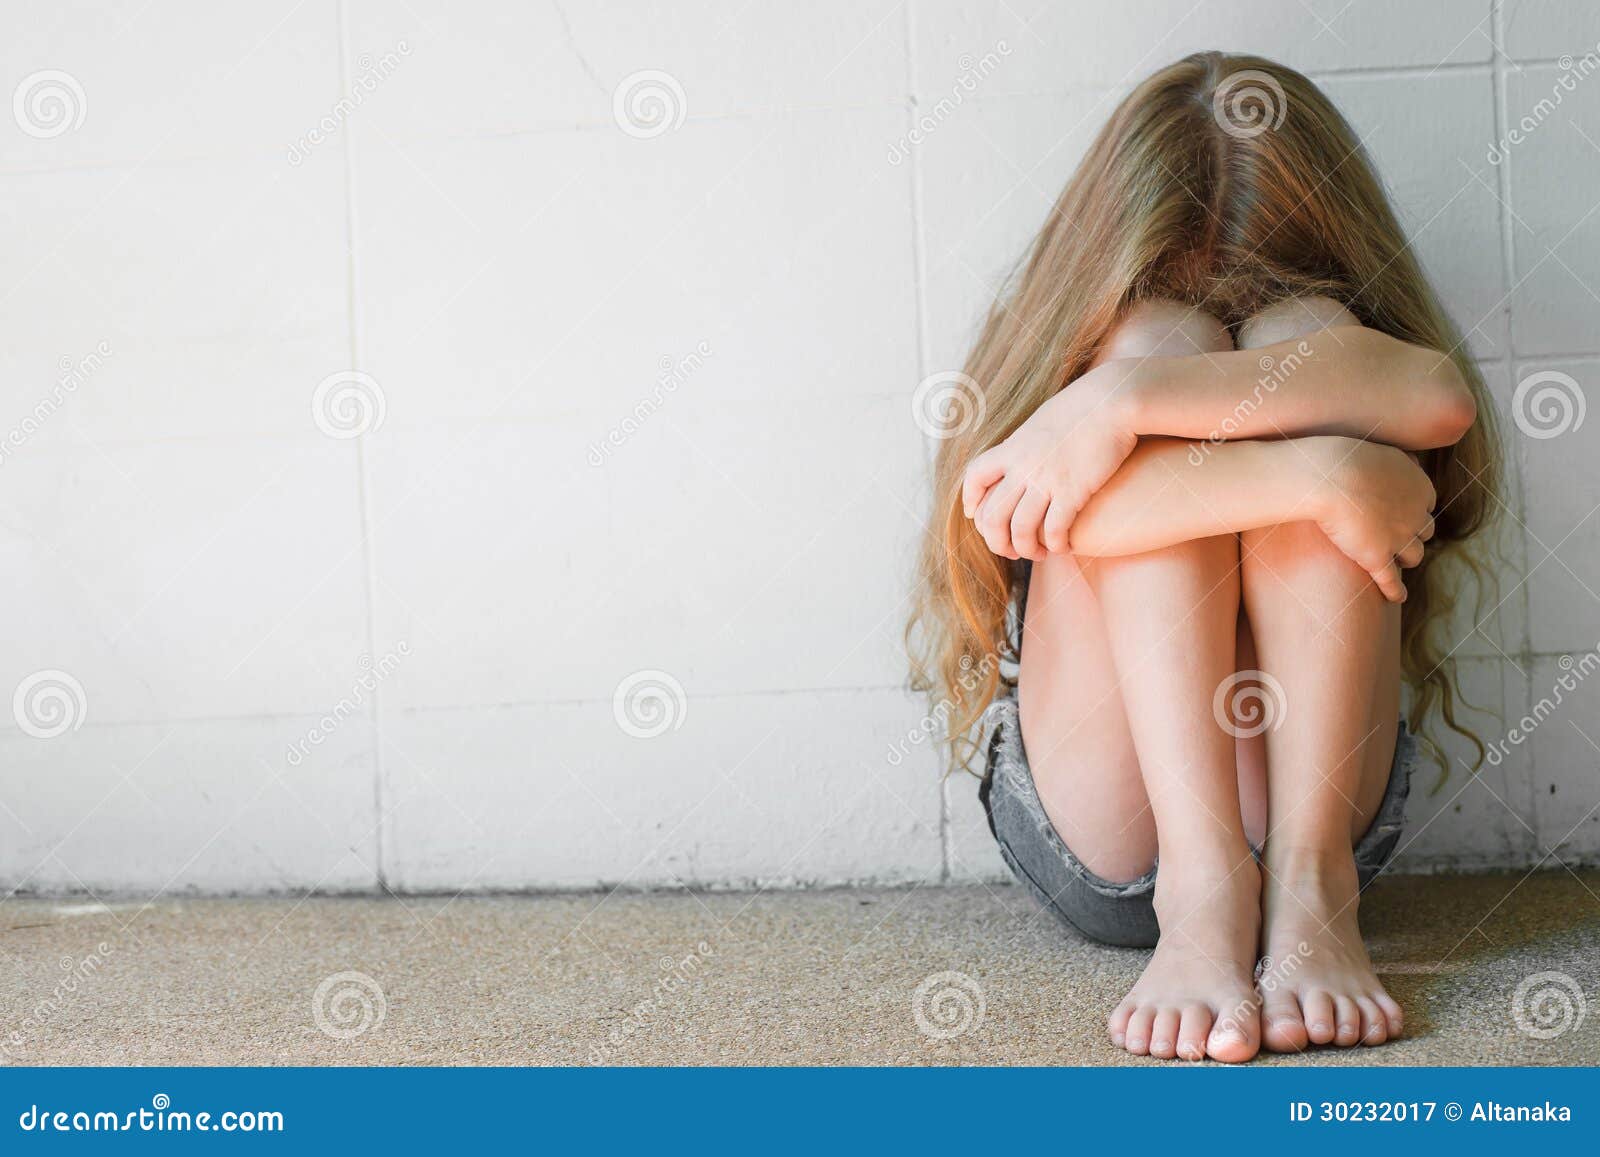 Sad little girl stock image. Image of alone, girl, lonely - 30232017